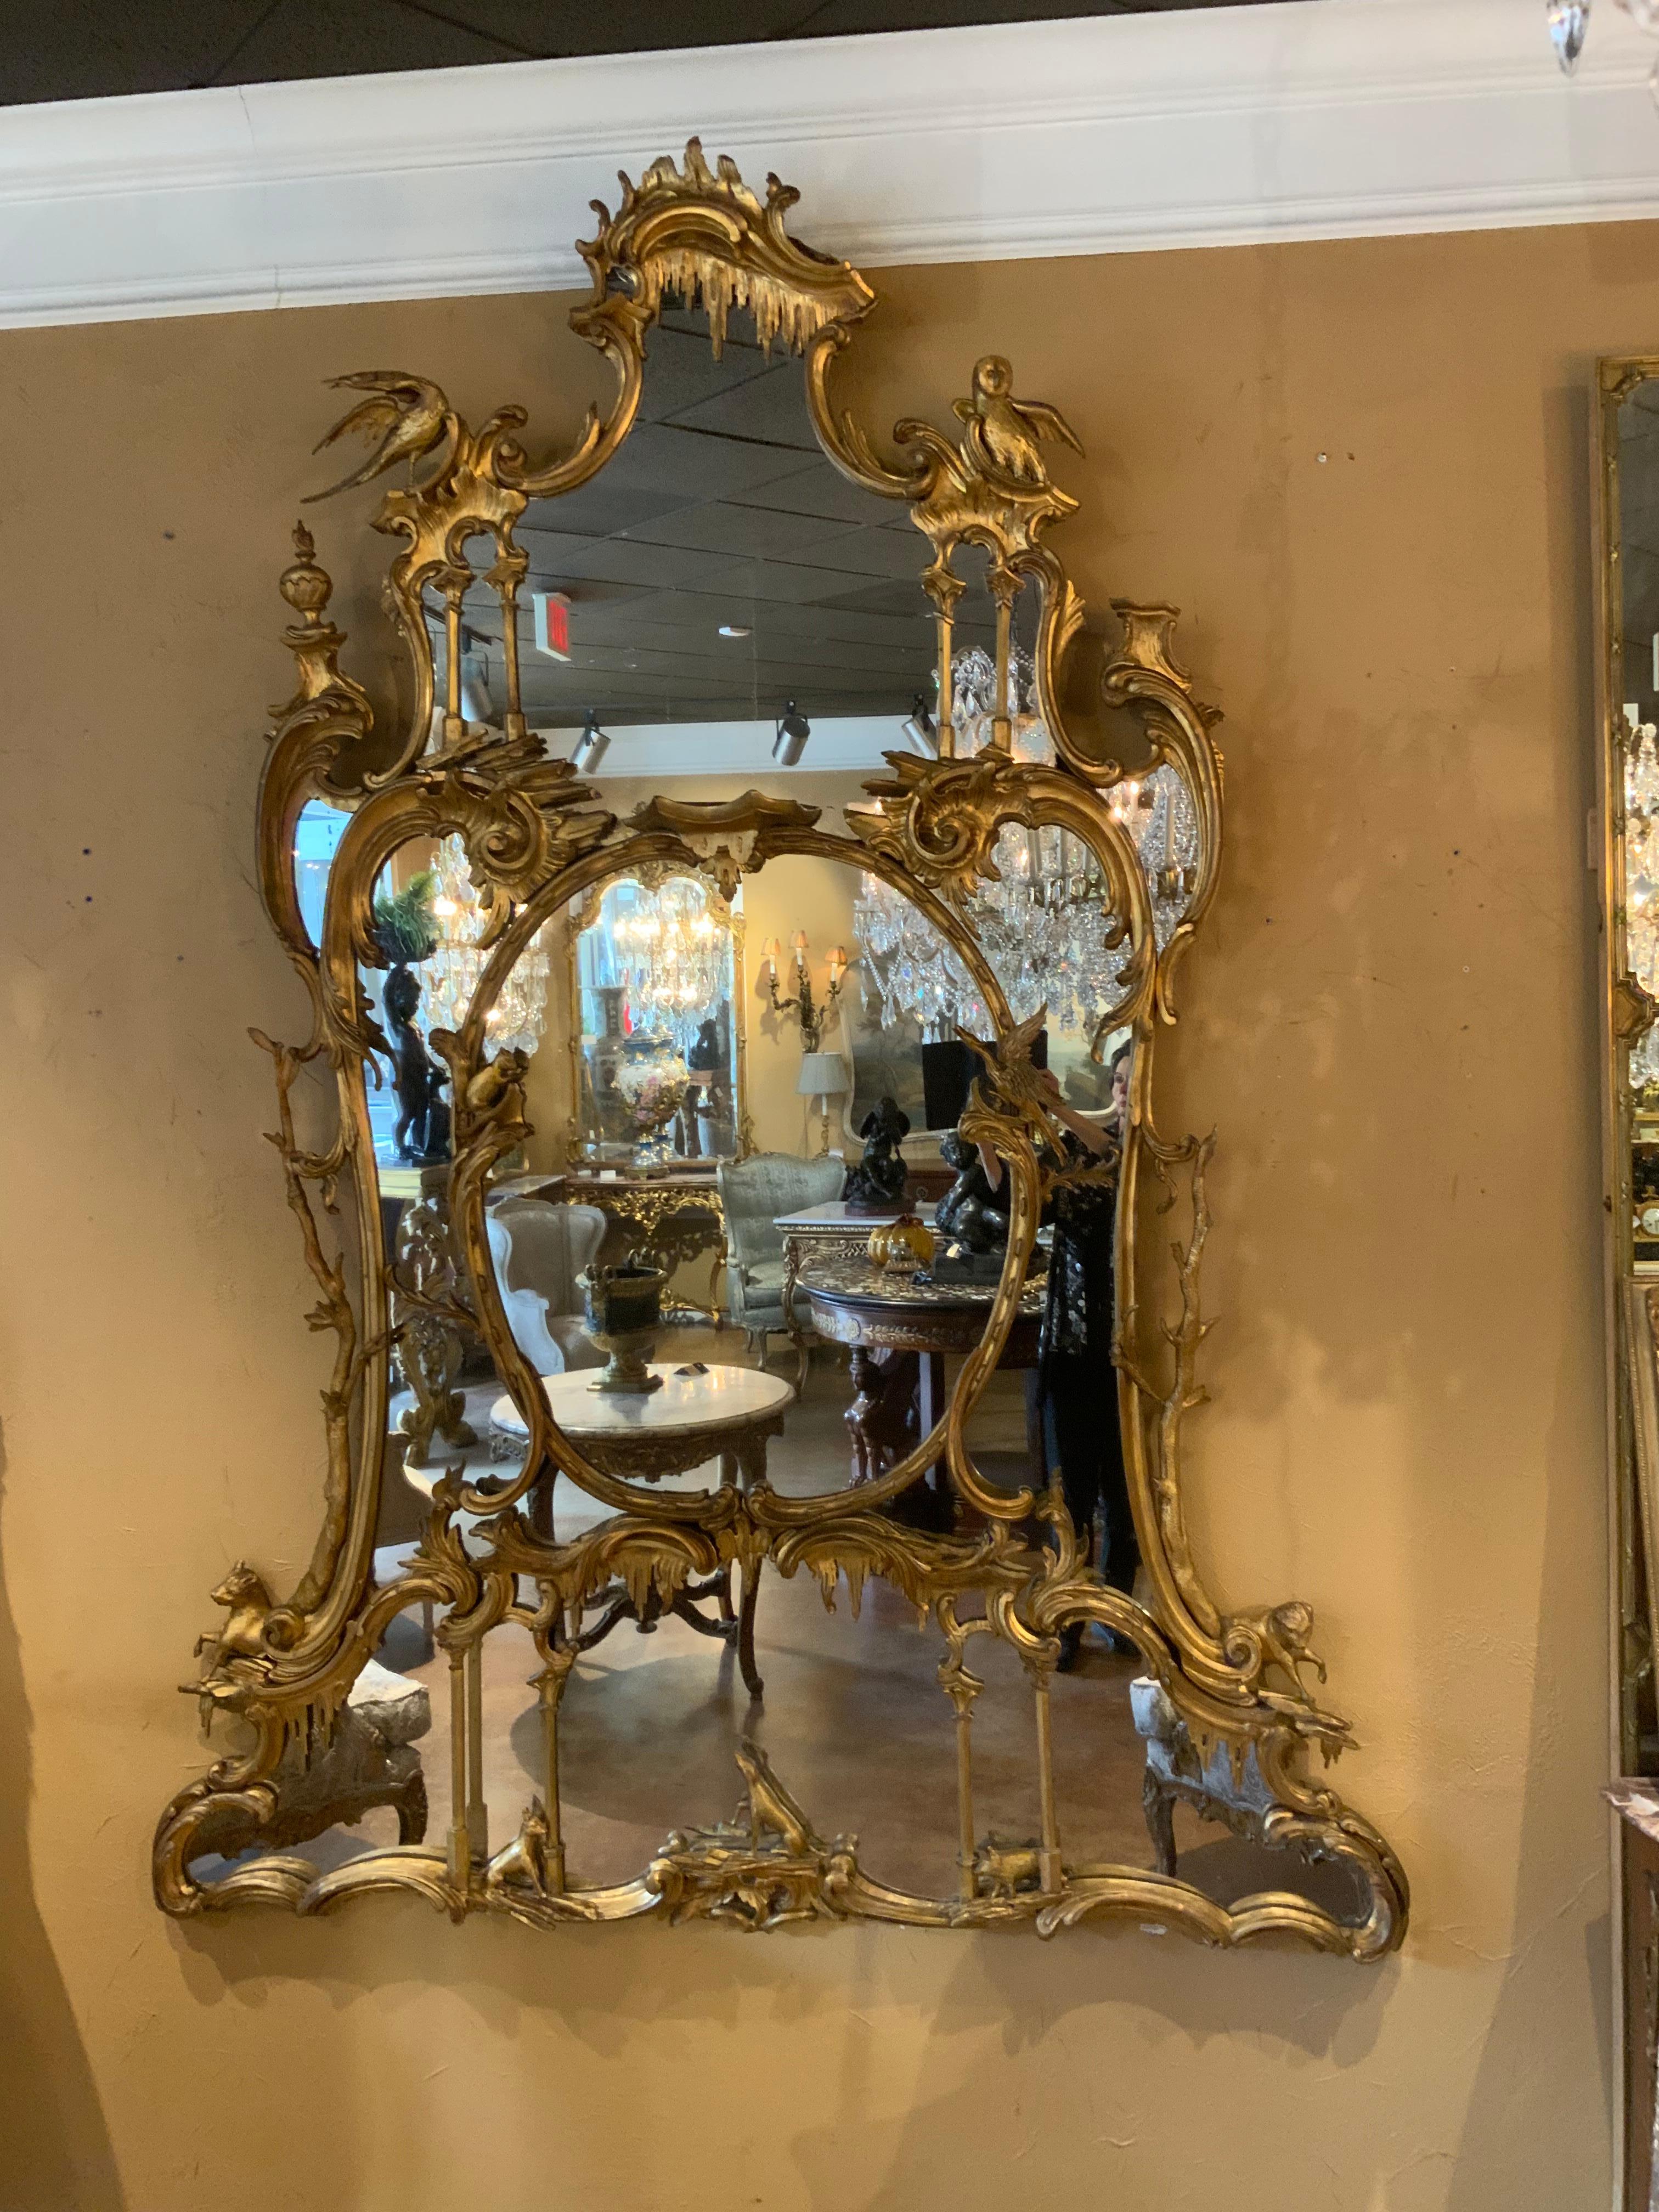 Palace size fine and rare gilt-wood mirror after a design by Thomas Johnson .
Circa 1750-1780’s chippendale mirror. Having finely carved hoho bird 
And Other animals positioned around the perimeter. Soft antique
Gold patina surrounds the entirety.